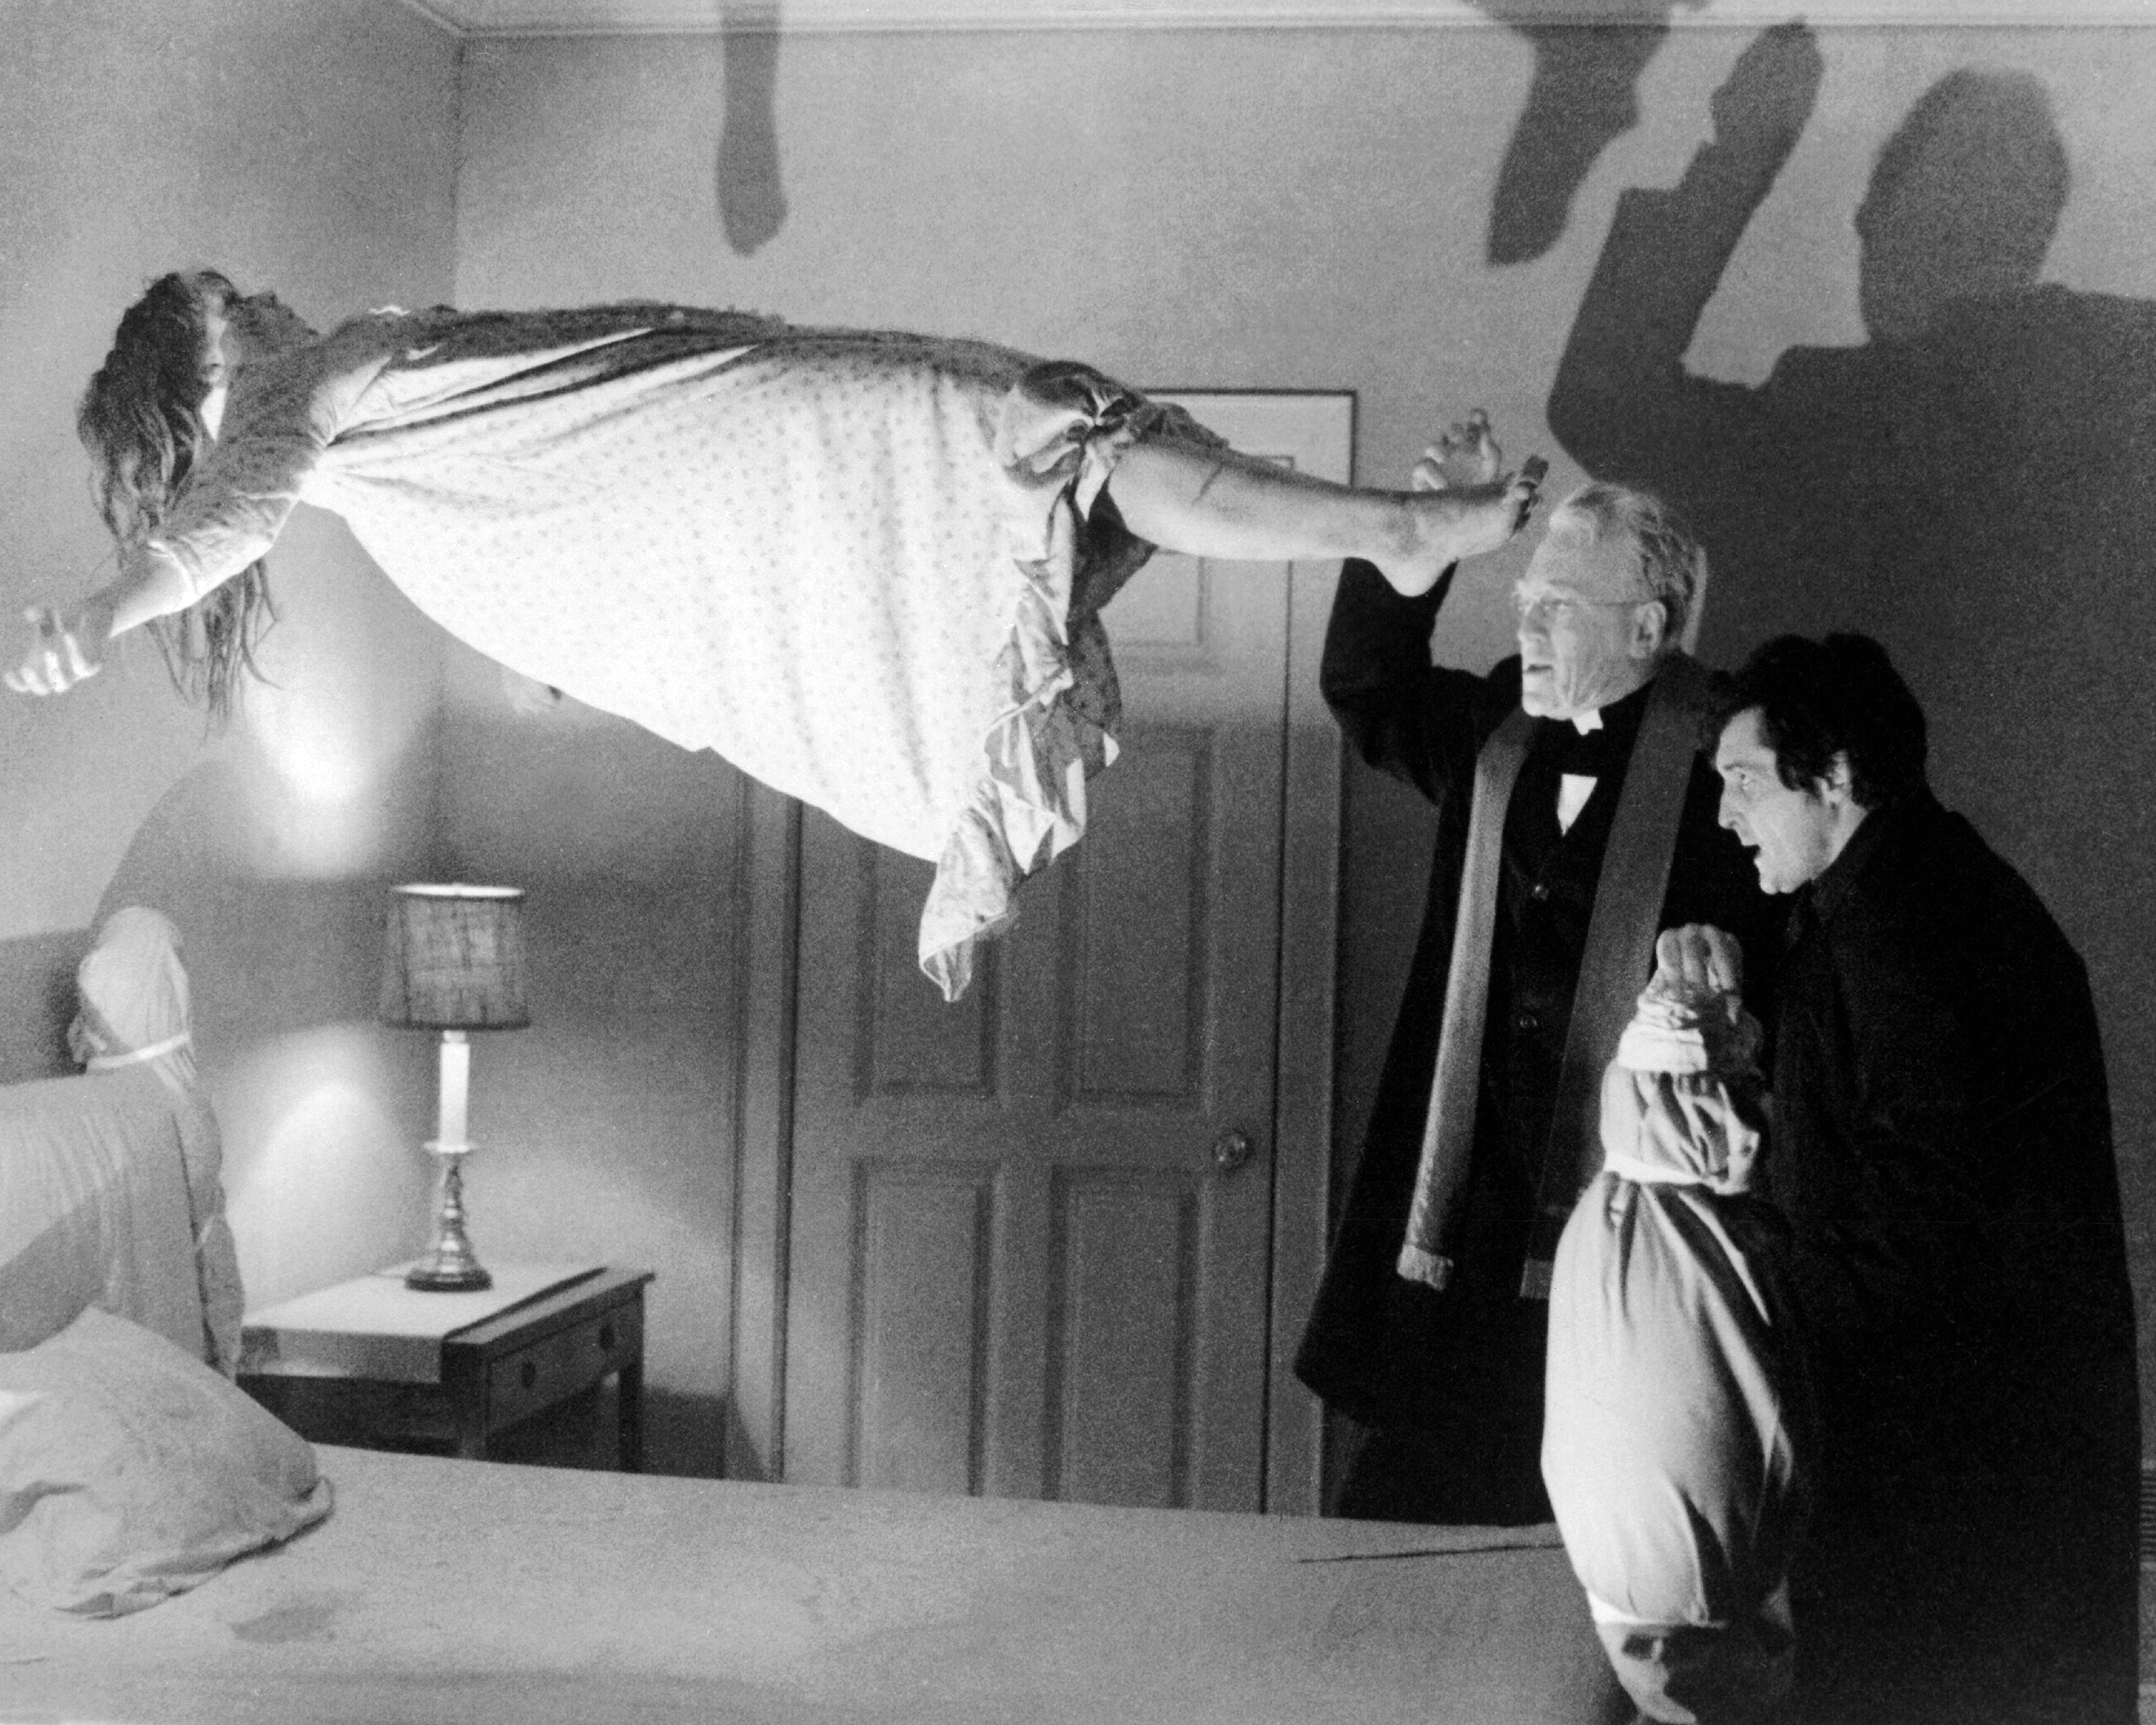 Linda Blair as Regan MacNeil, Max von Sydow as Father Merrin, and Jason Miller as Father Karras in <i>The Exorcist</i>, directed by William Friedkin, 1973. (Silver Screen Collection/;Getty Images)